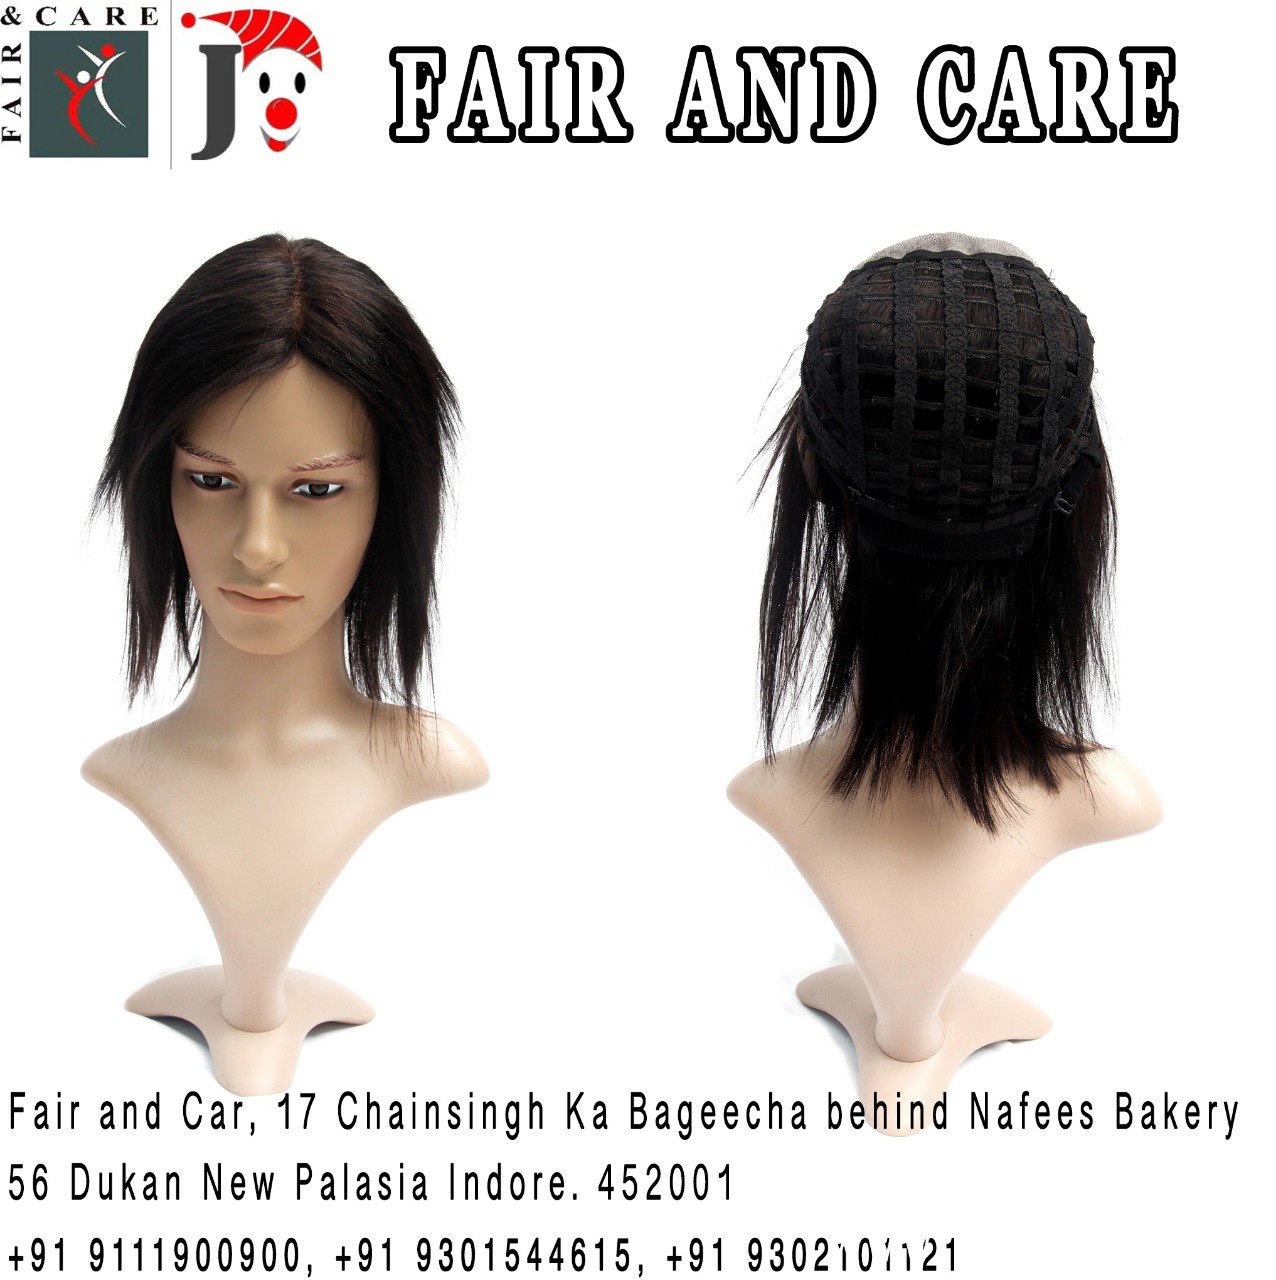 Hair Wigs, Hair Extensions, Hair Patch, Cancer Patients wigs, Classy wigsHealth and BeautyHealth Care ProductsAll Indiaother